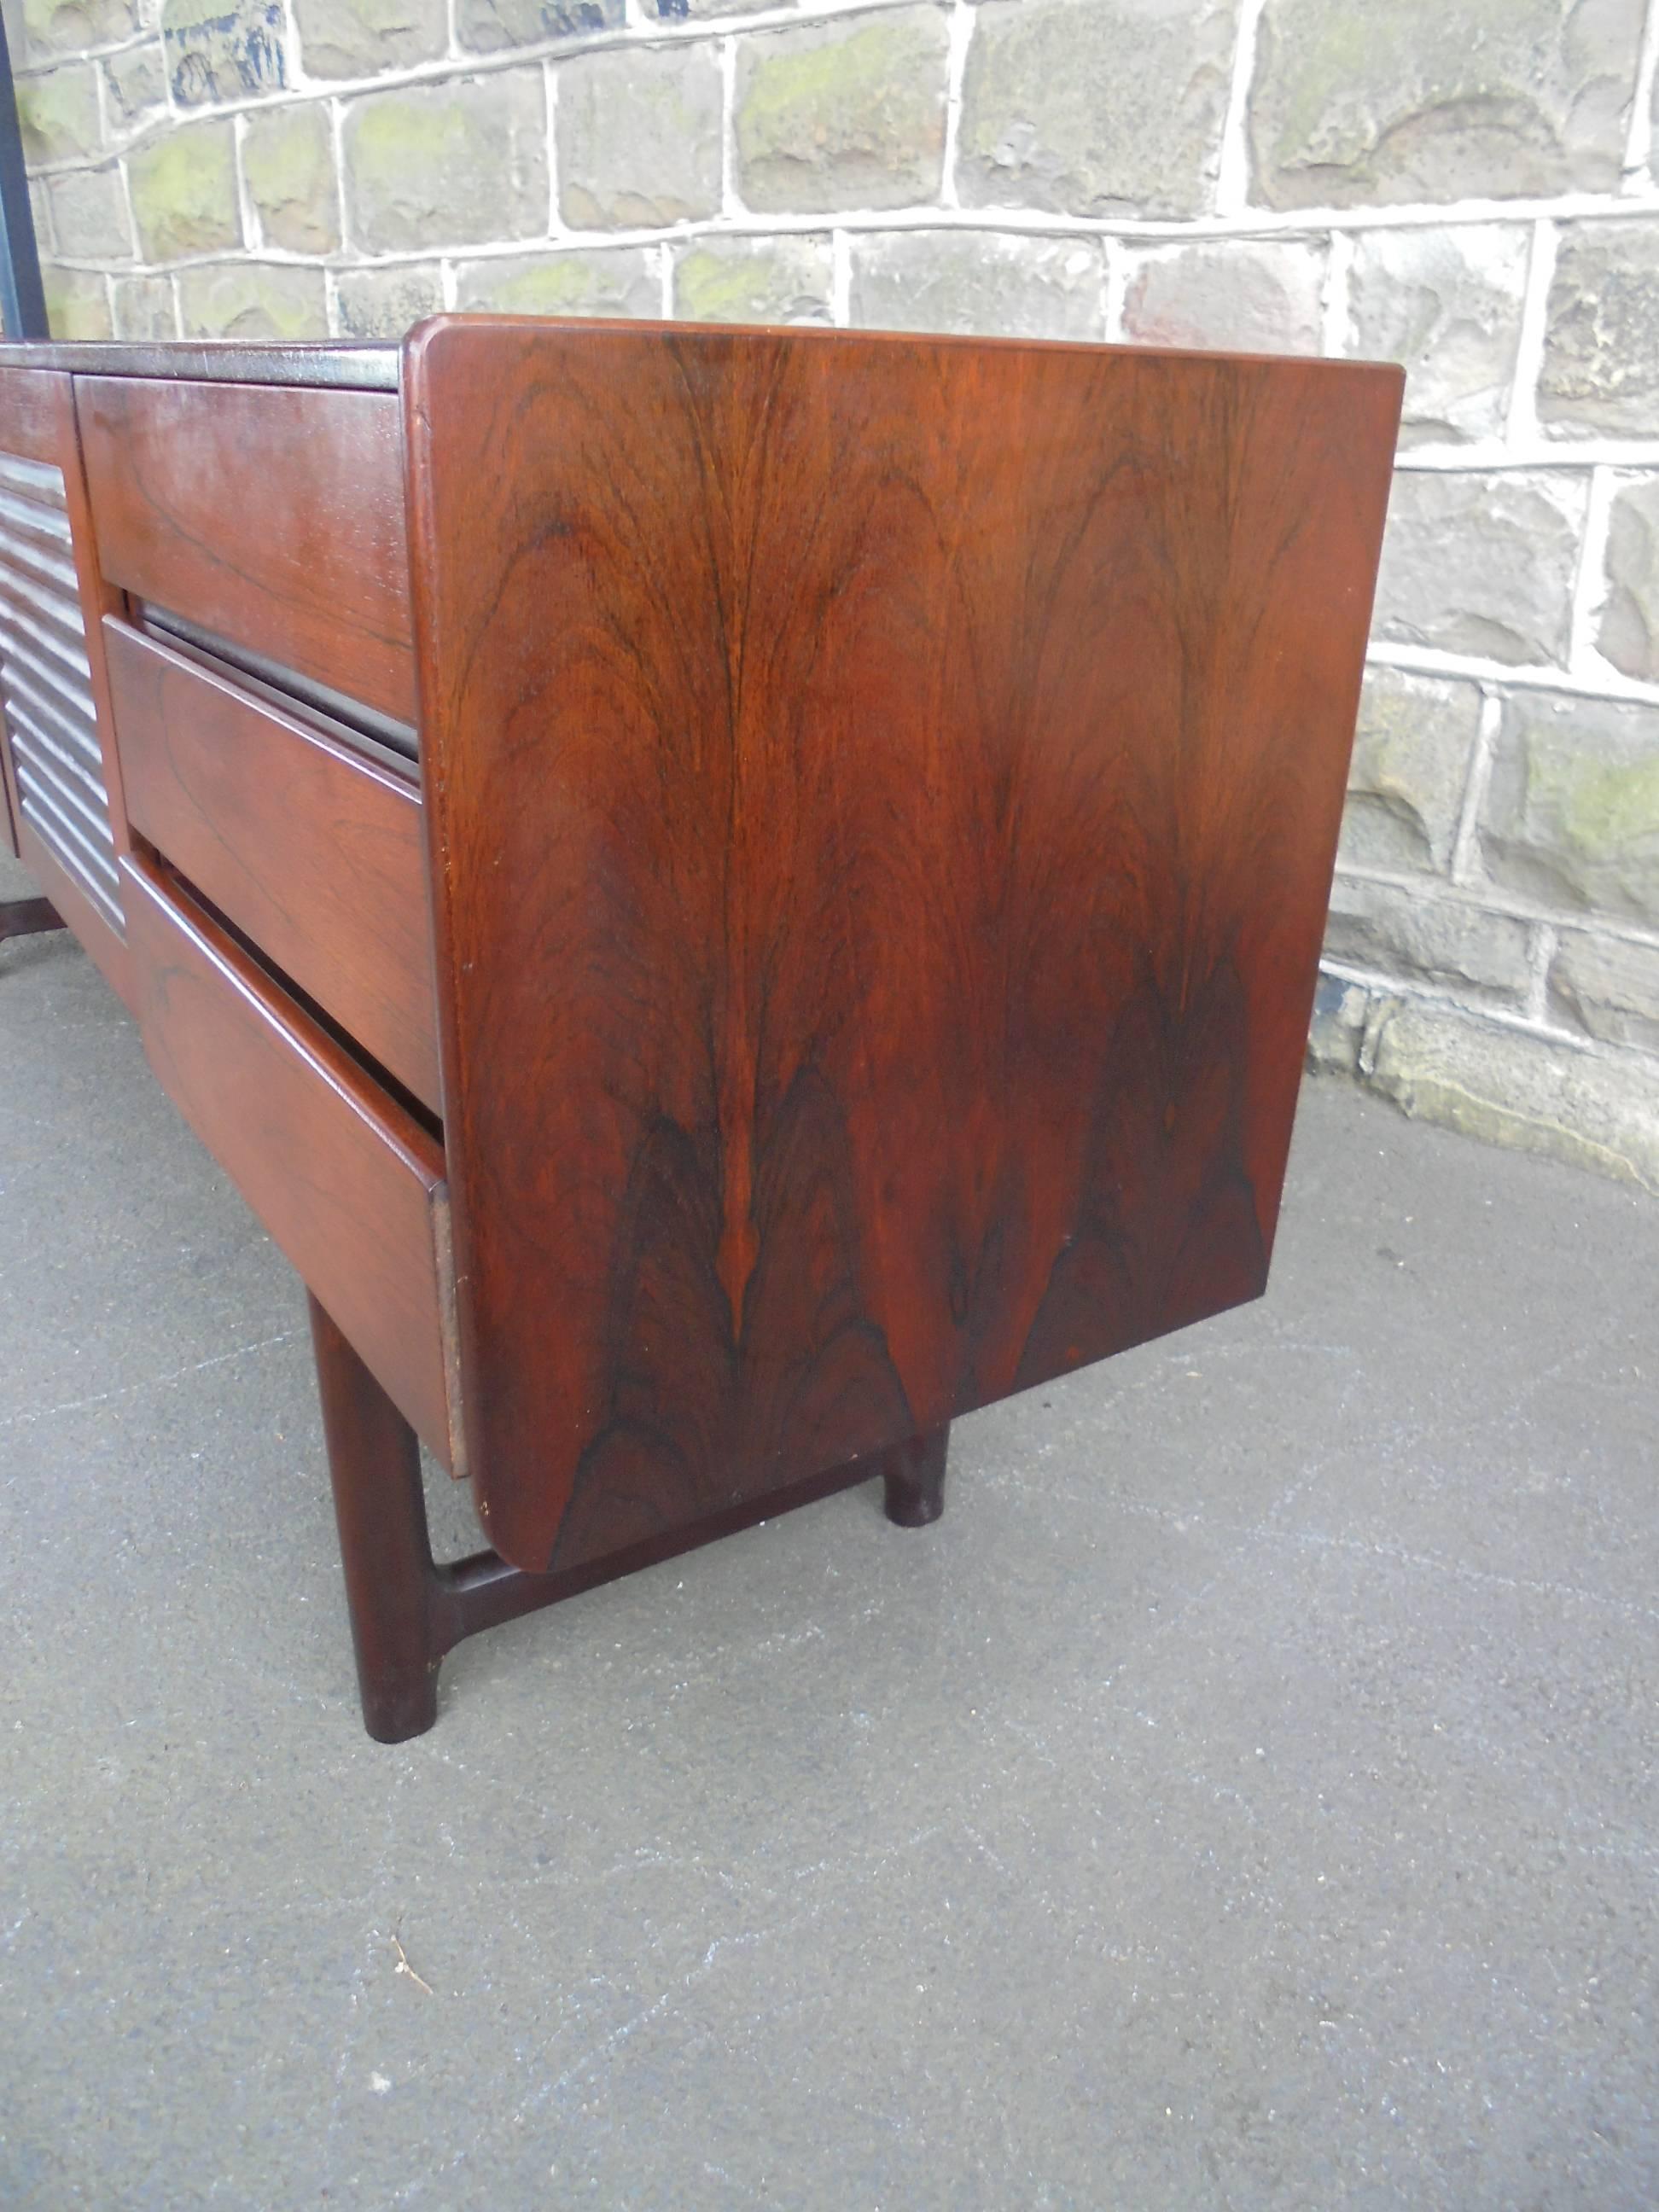 Offered for sale is this good retro 1960s rosewood sideboard by McIntosh.

Nice long sideboard in rosewood with three-draws and cupboard doors with louvre fronts & brass handles. Standing on rounded rosewood legs.

Offered in good clean original